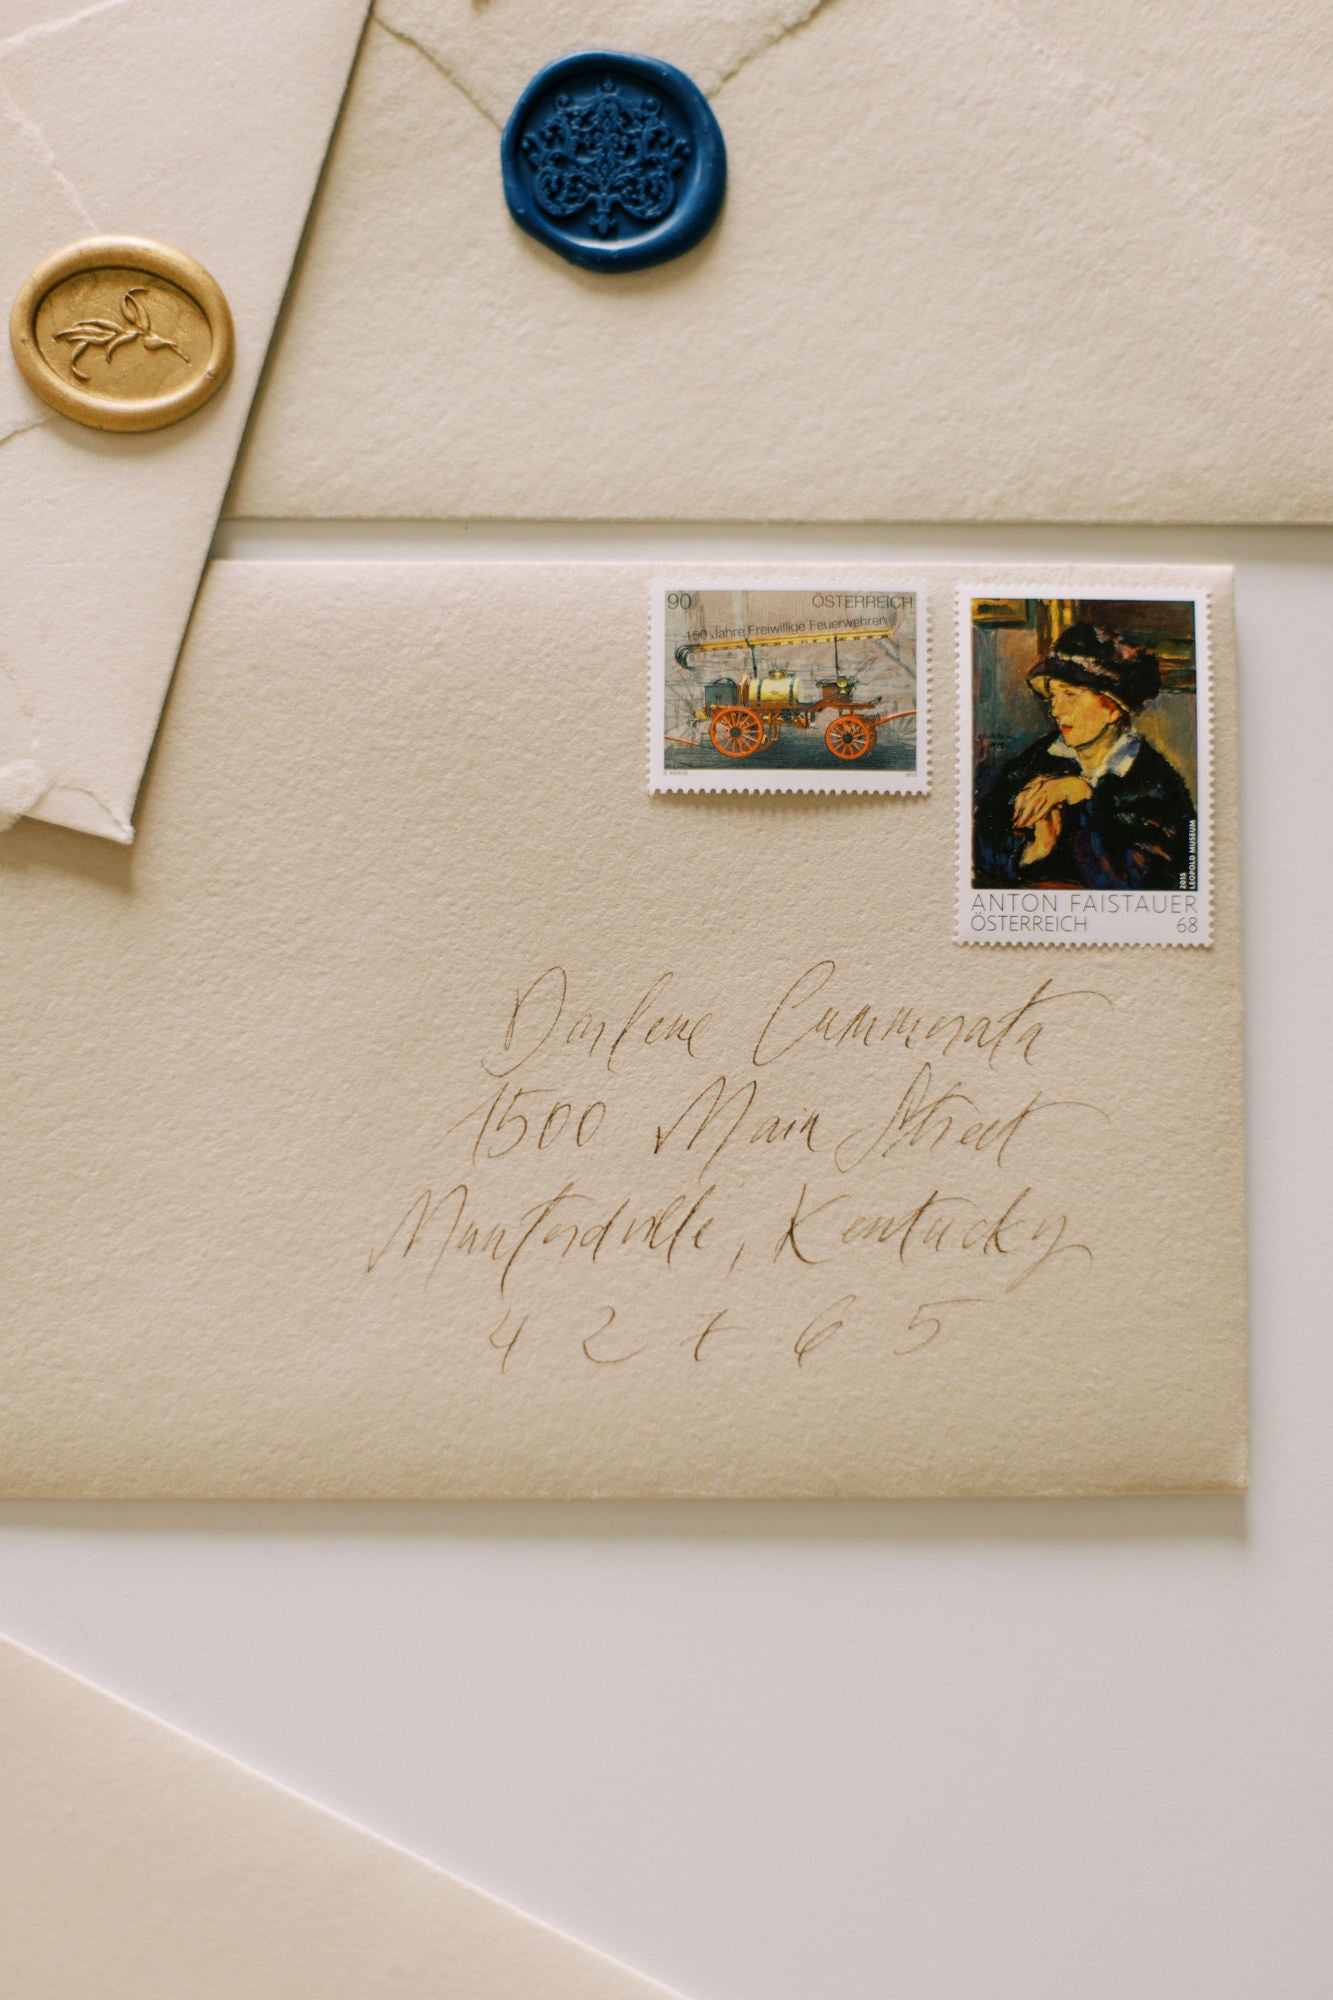 Embrace the art of thoughtful correspondence by selecting hand-canceling postage to protect your delicate handmade paper.